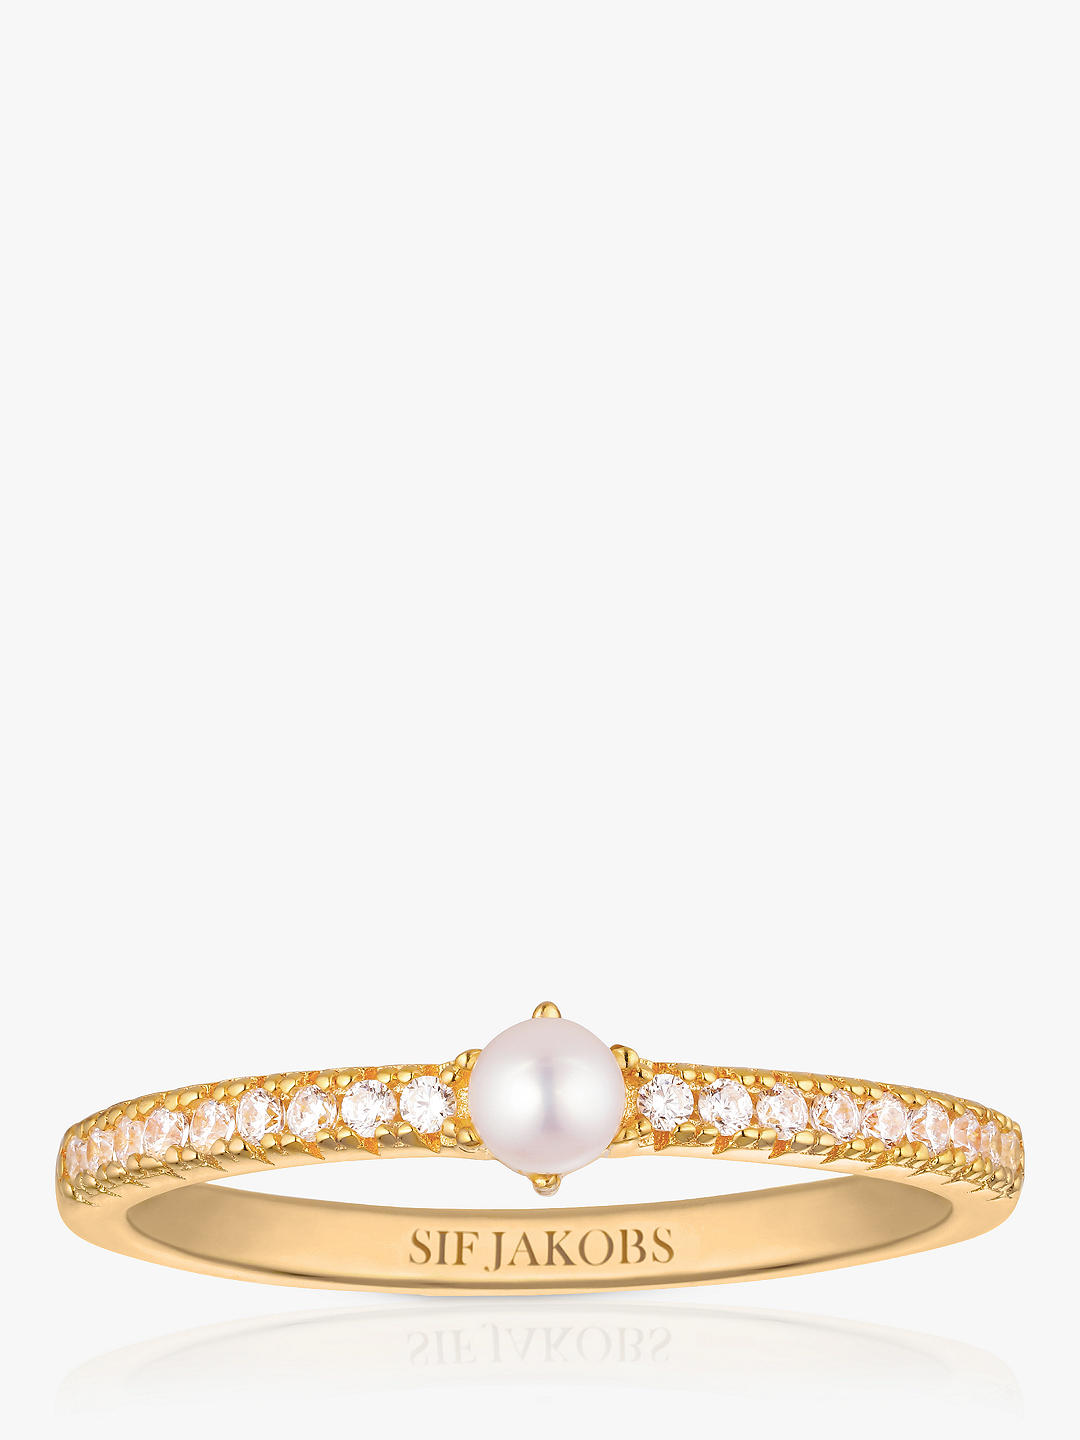 Sif Jakobs Jewellery Pearl Cubic Zirconia Cocktail Ring, Gold